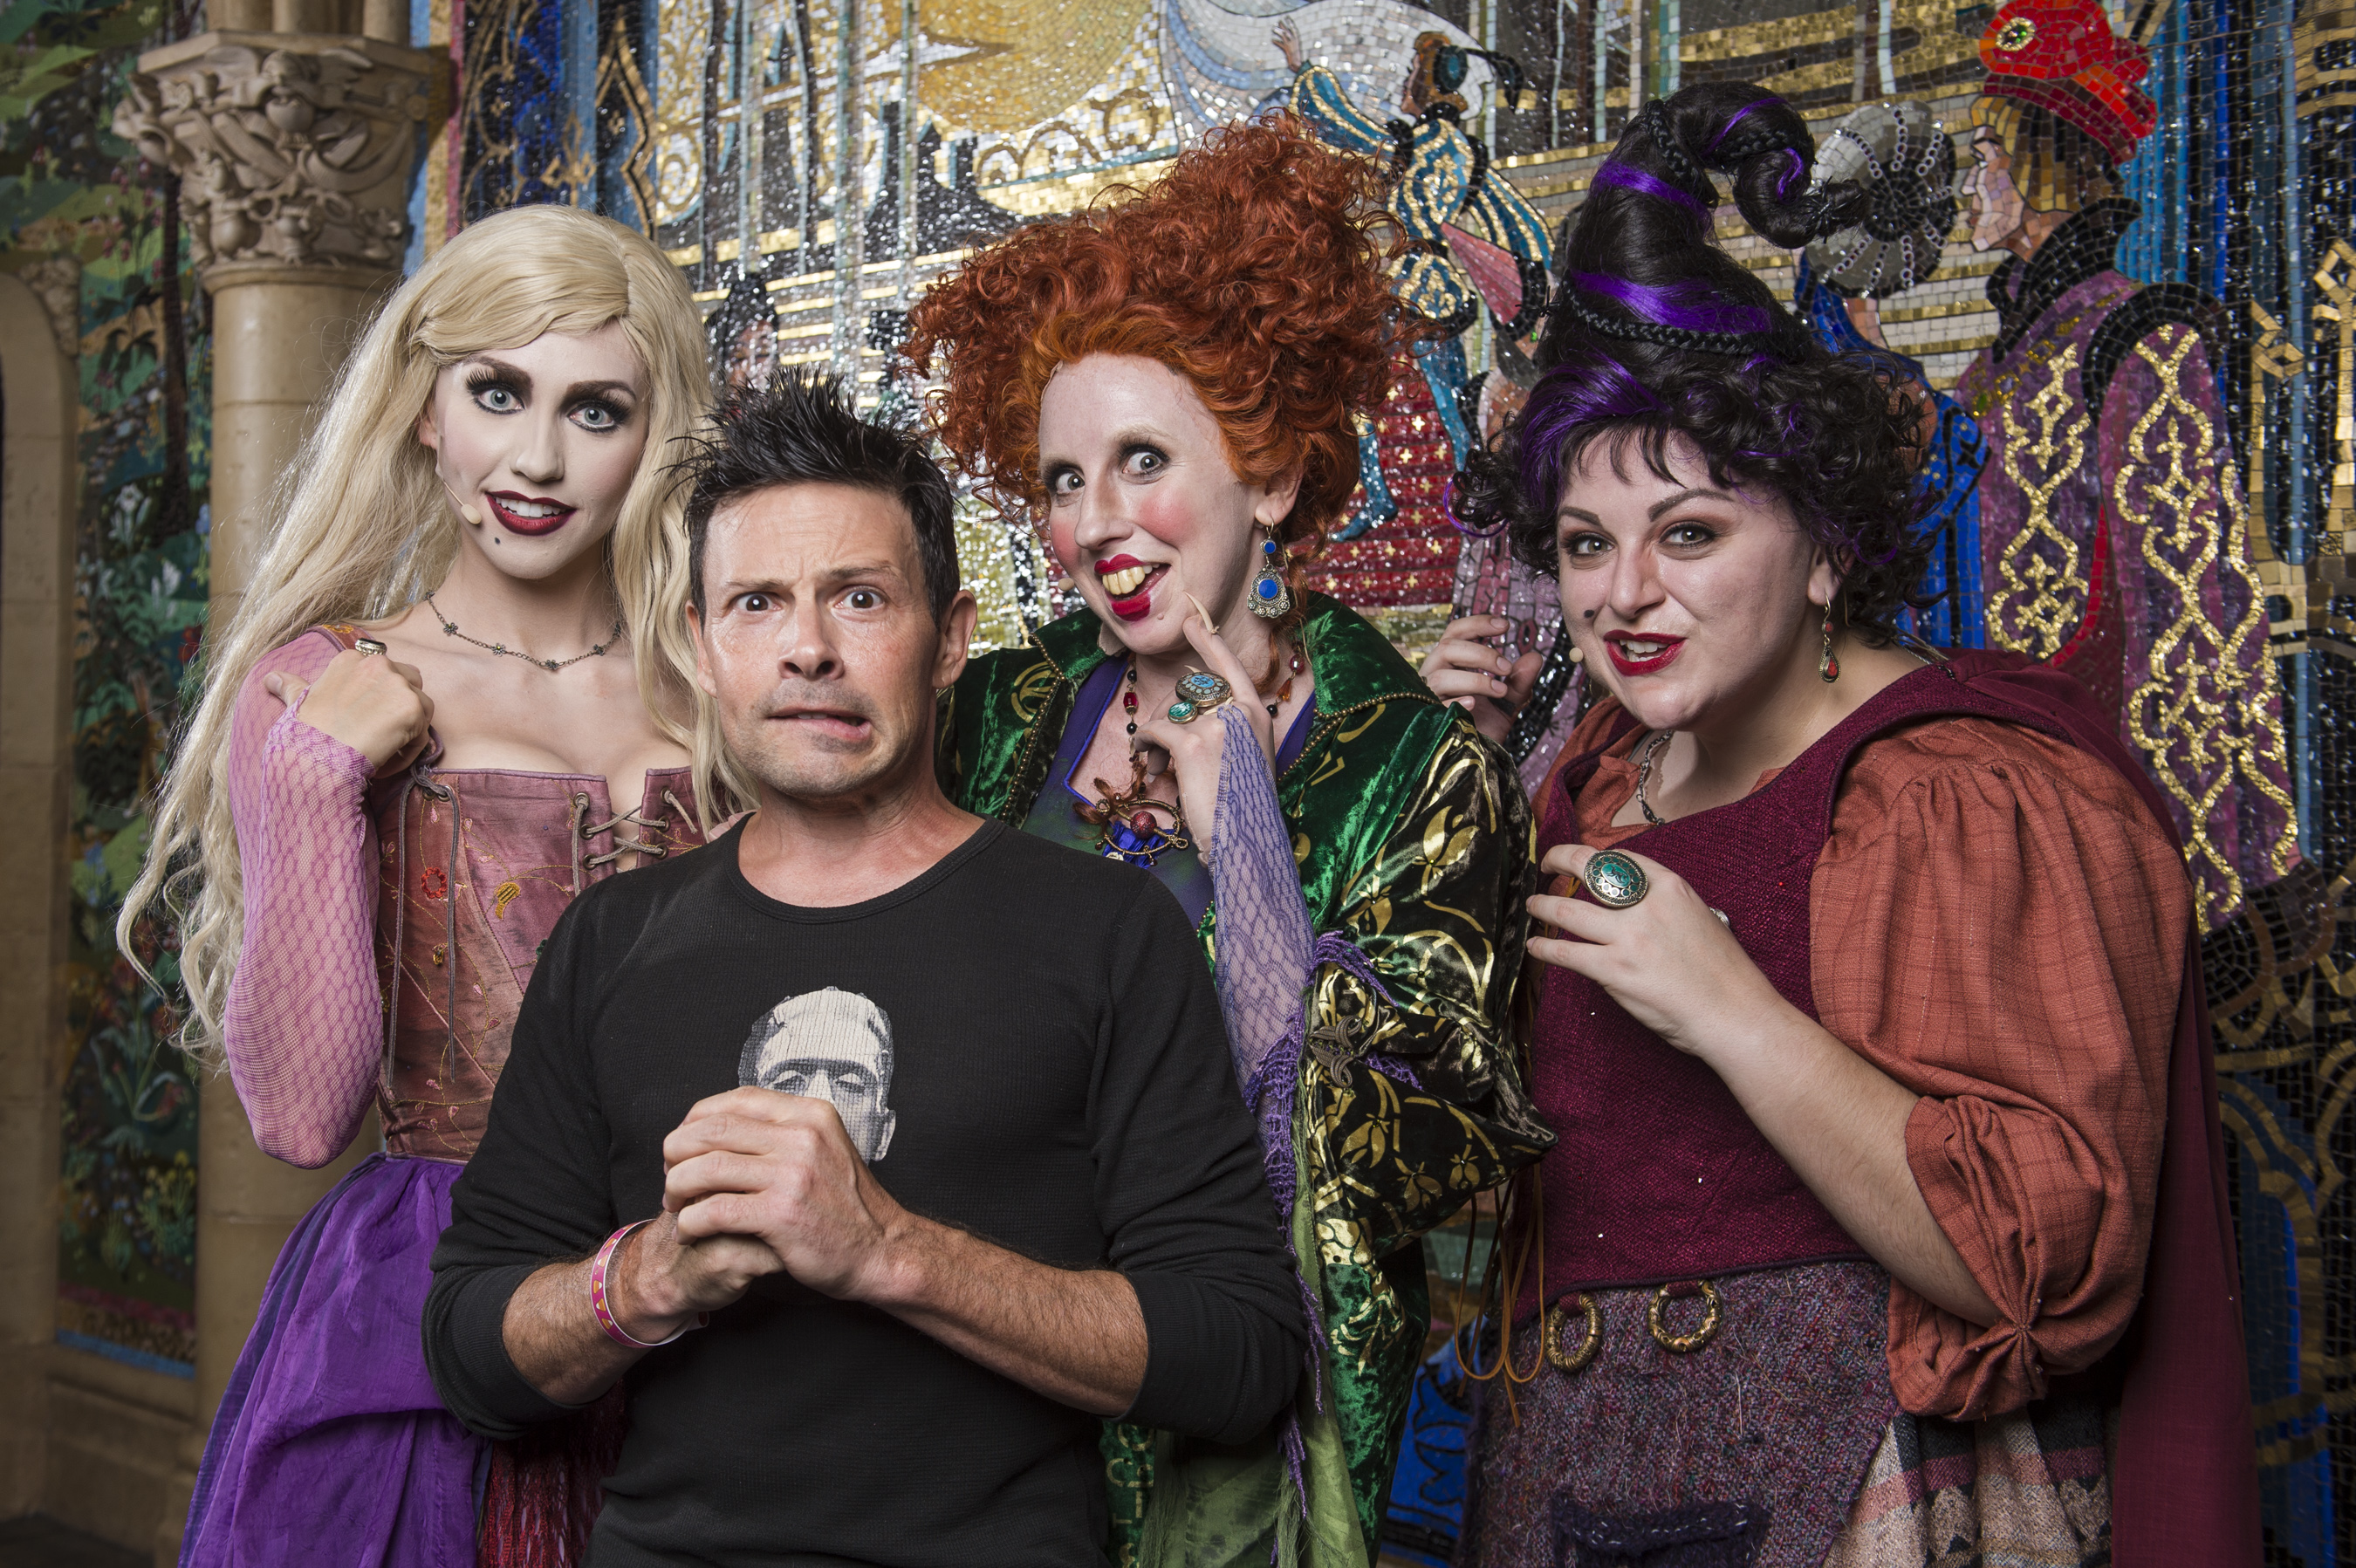 Actor Jason Marsden, who voiced the cat Thackery Binx in Disney's 'Hocus Pocus,' visits the infamous Sanderson Sisters